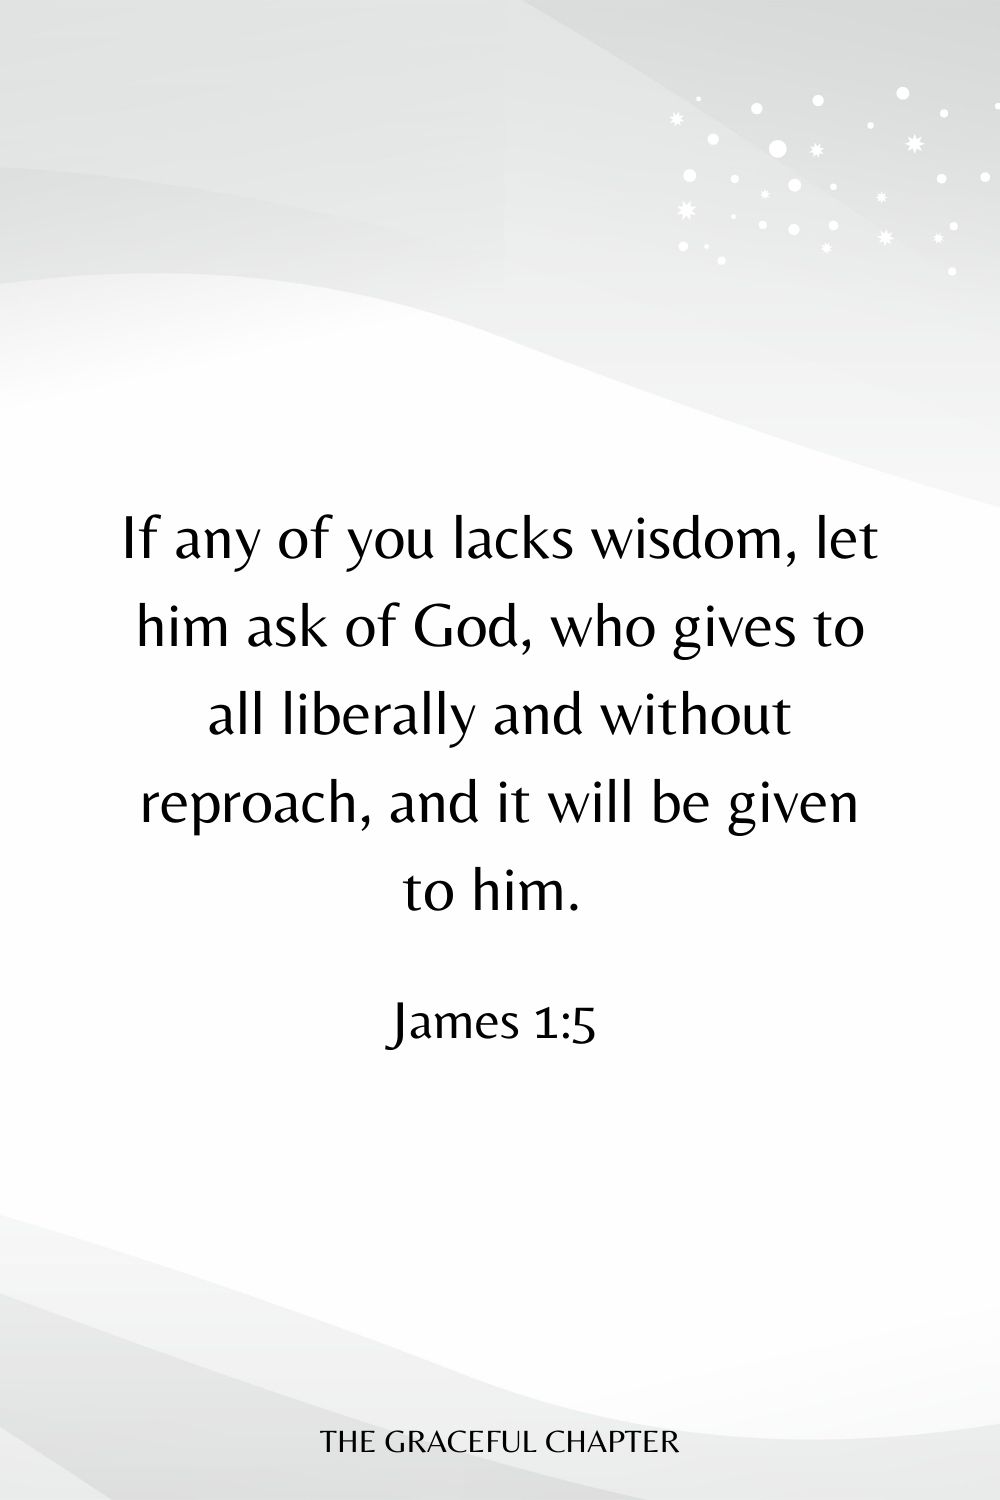 If any of you lacks wisdom, let him ask of God, who gives to all liberally and without reproach, and it will be given to him. James 1:5